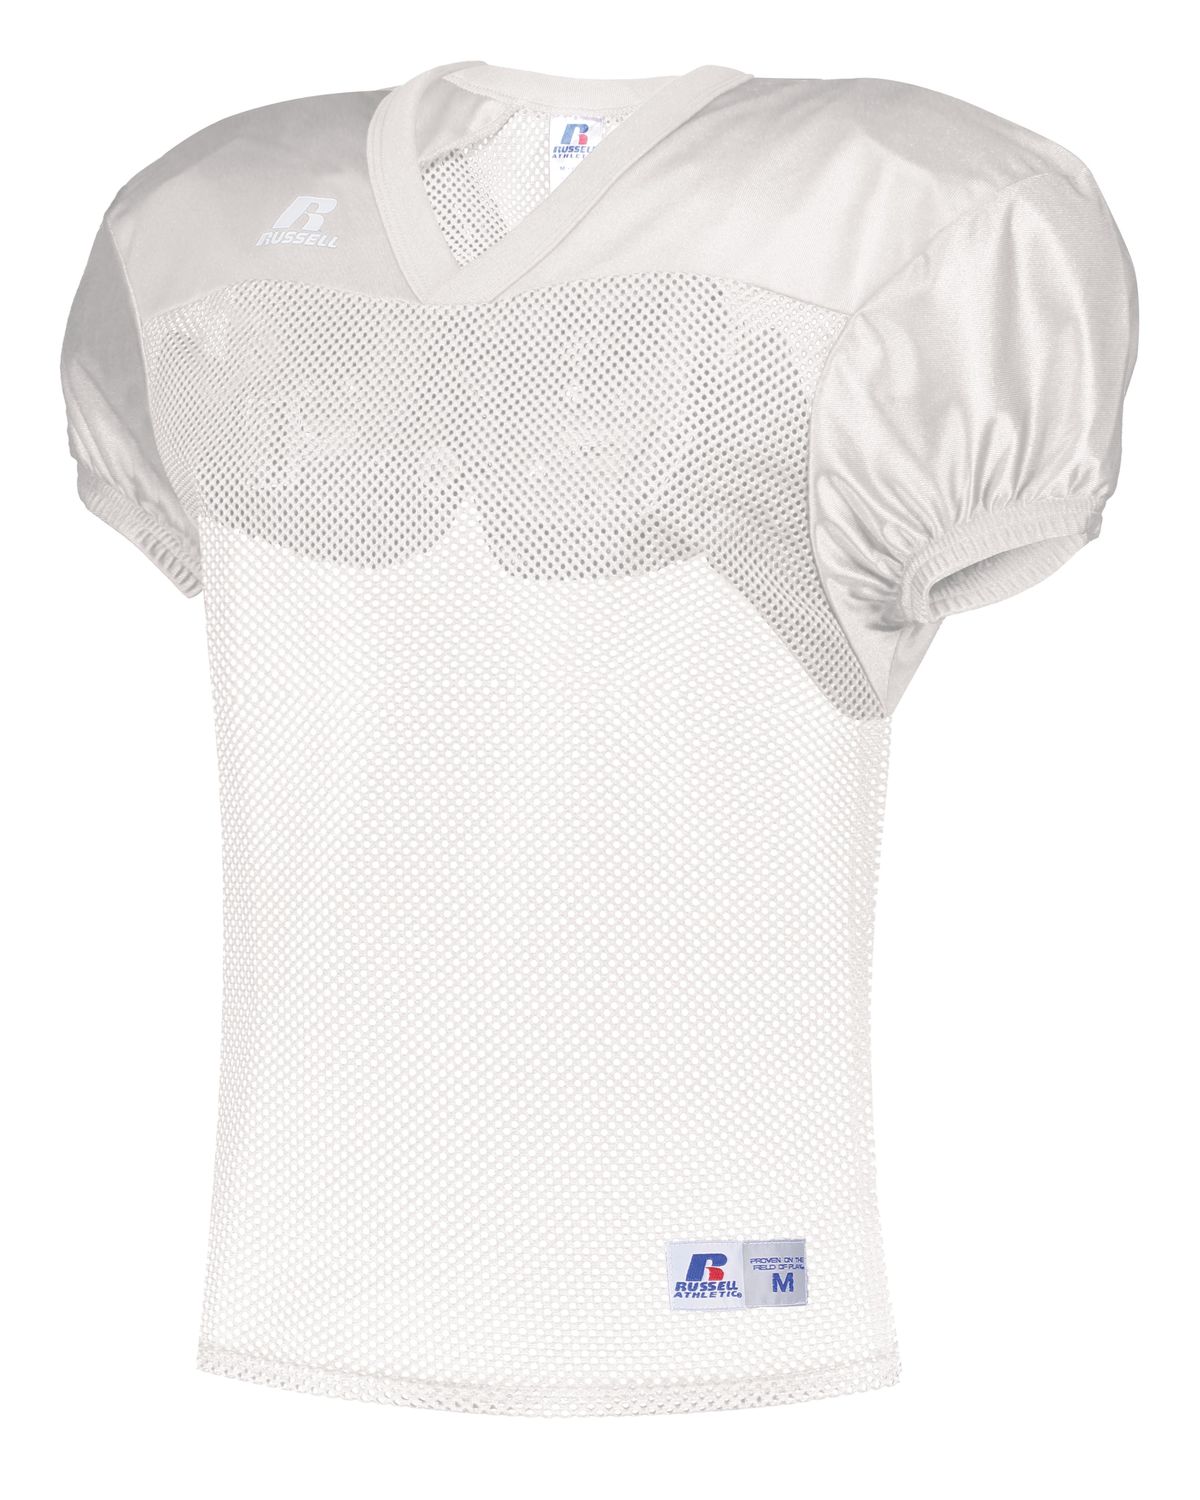 'Russell Athletic S096BM Stock practice jersey'